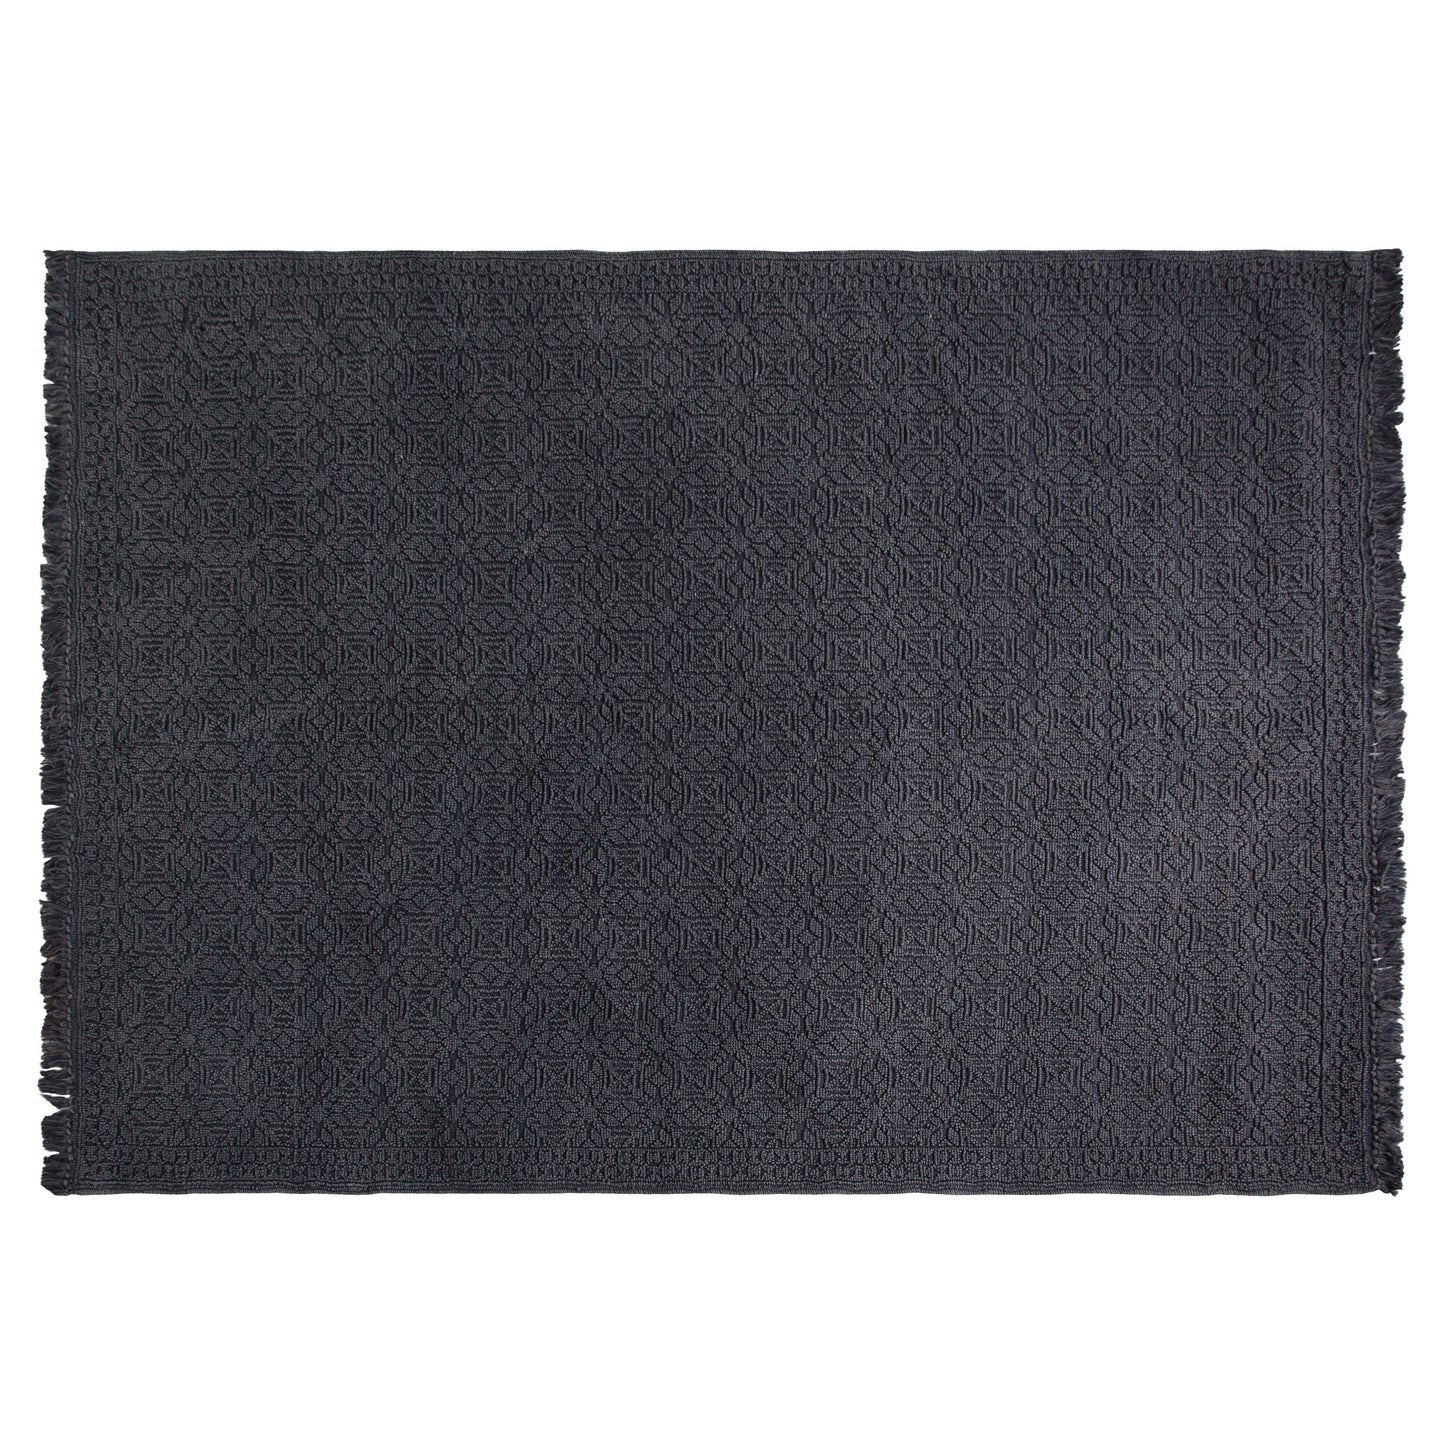 Load image into Gallery viewer, A Wentworth Rug Charcoal 1600x2300mm with fringes perfect for home interior decor from Kikiathome.co.uk.
